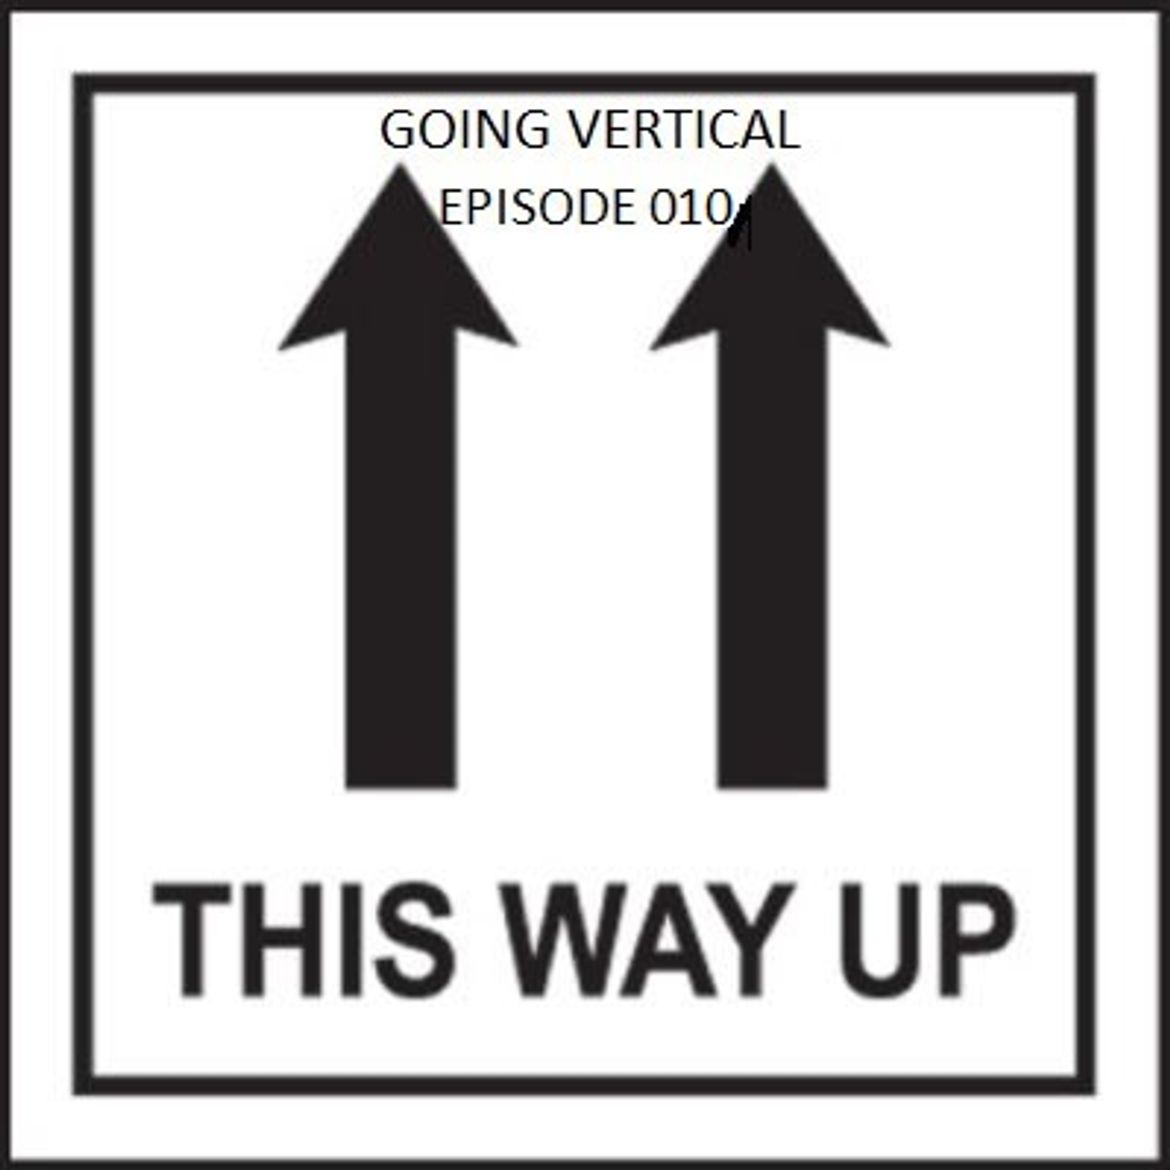 This way meaning